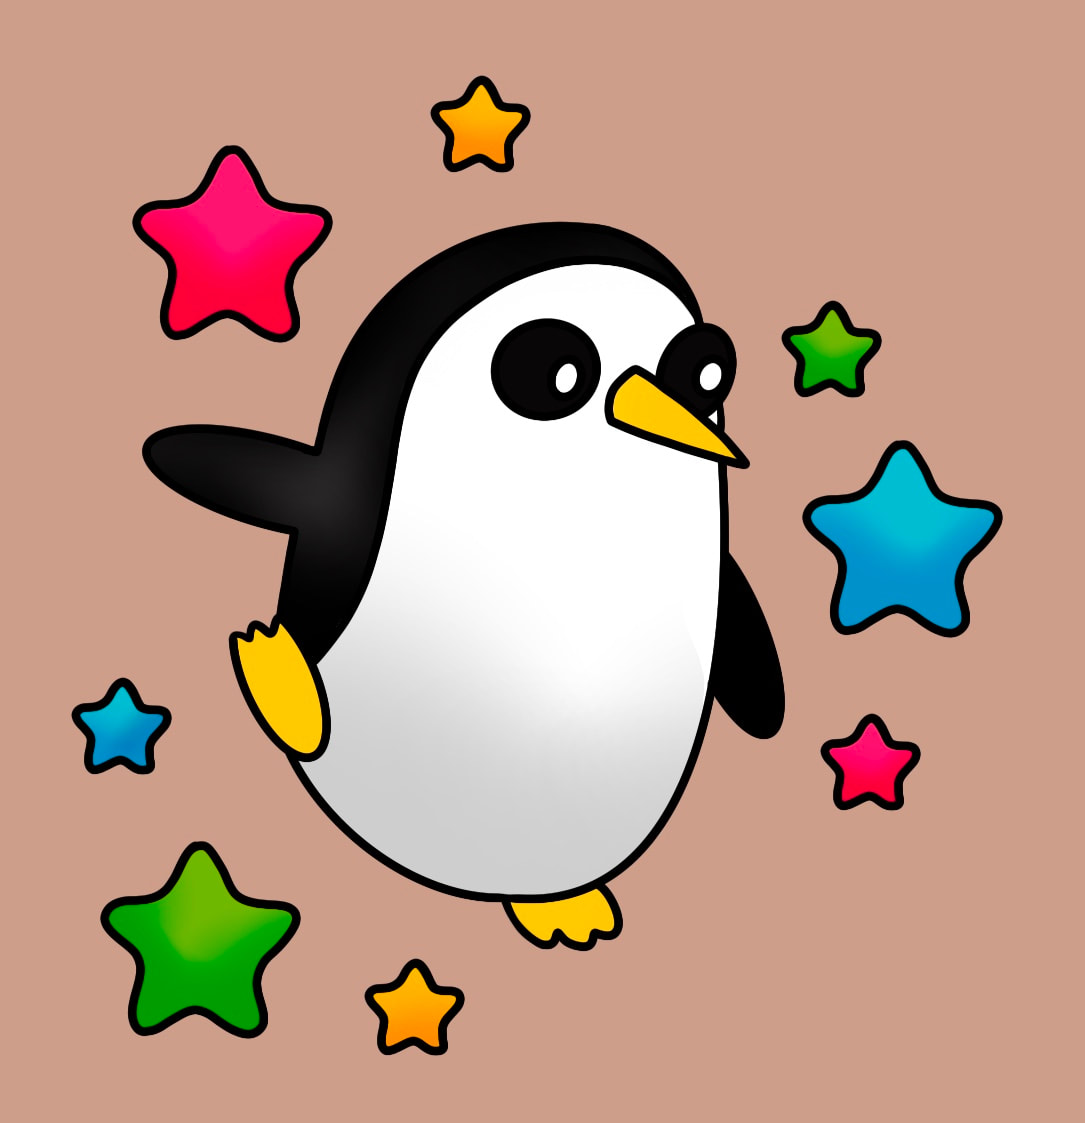 Gunter from Adventure Time dancing with star background.